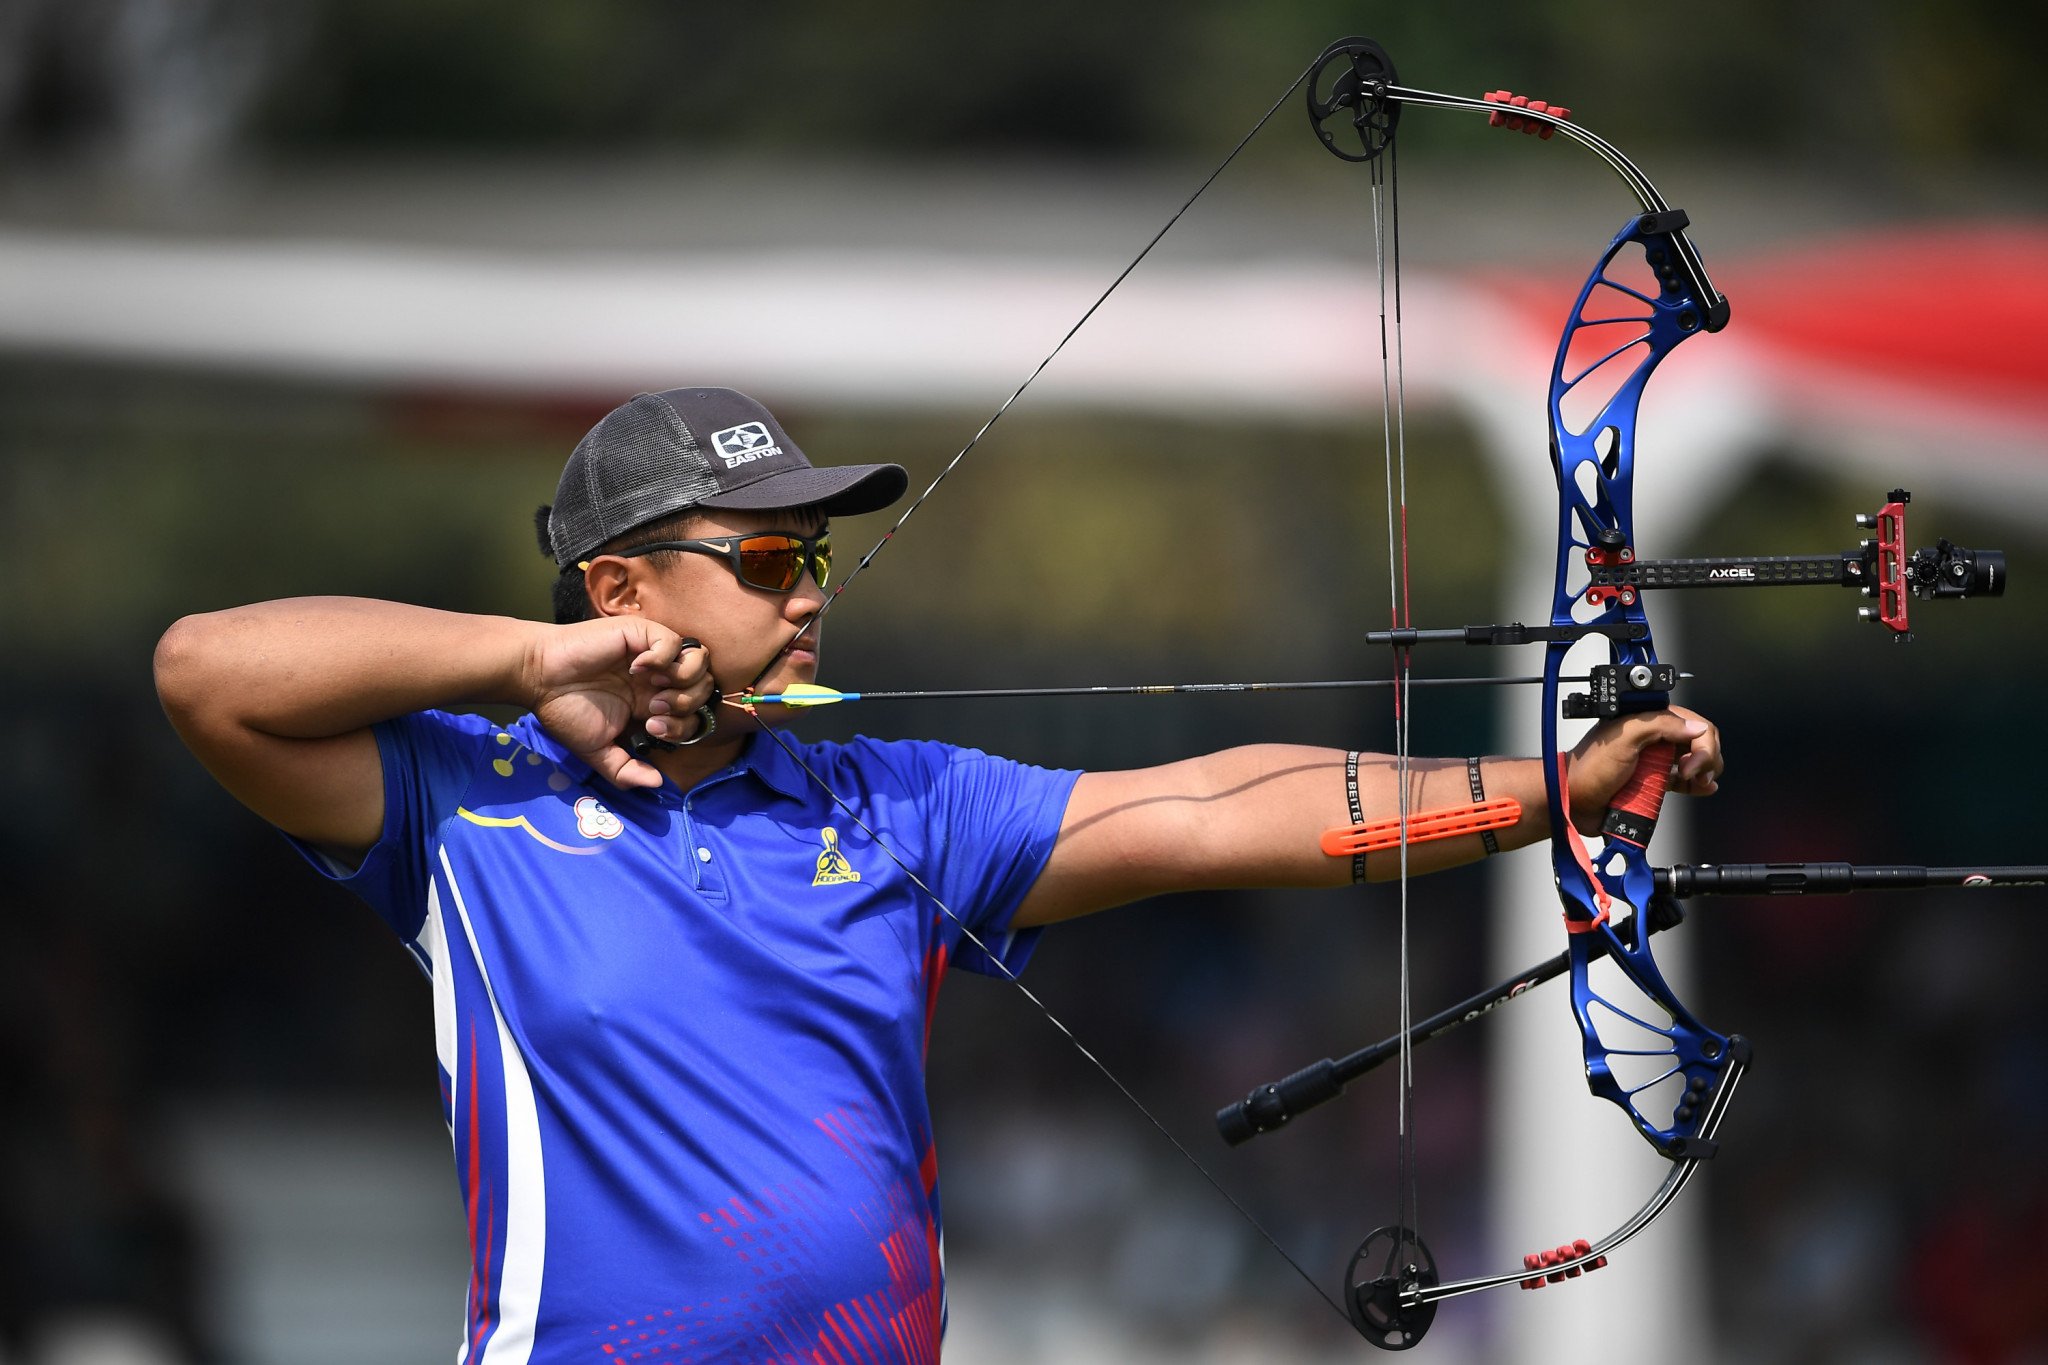 Chinese Taipei won two archery gold medals, in the men's team recurve and mixed team compound ©Getty Images